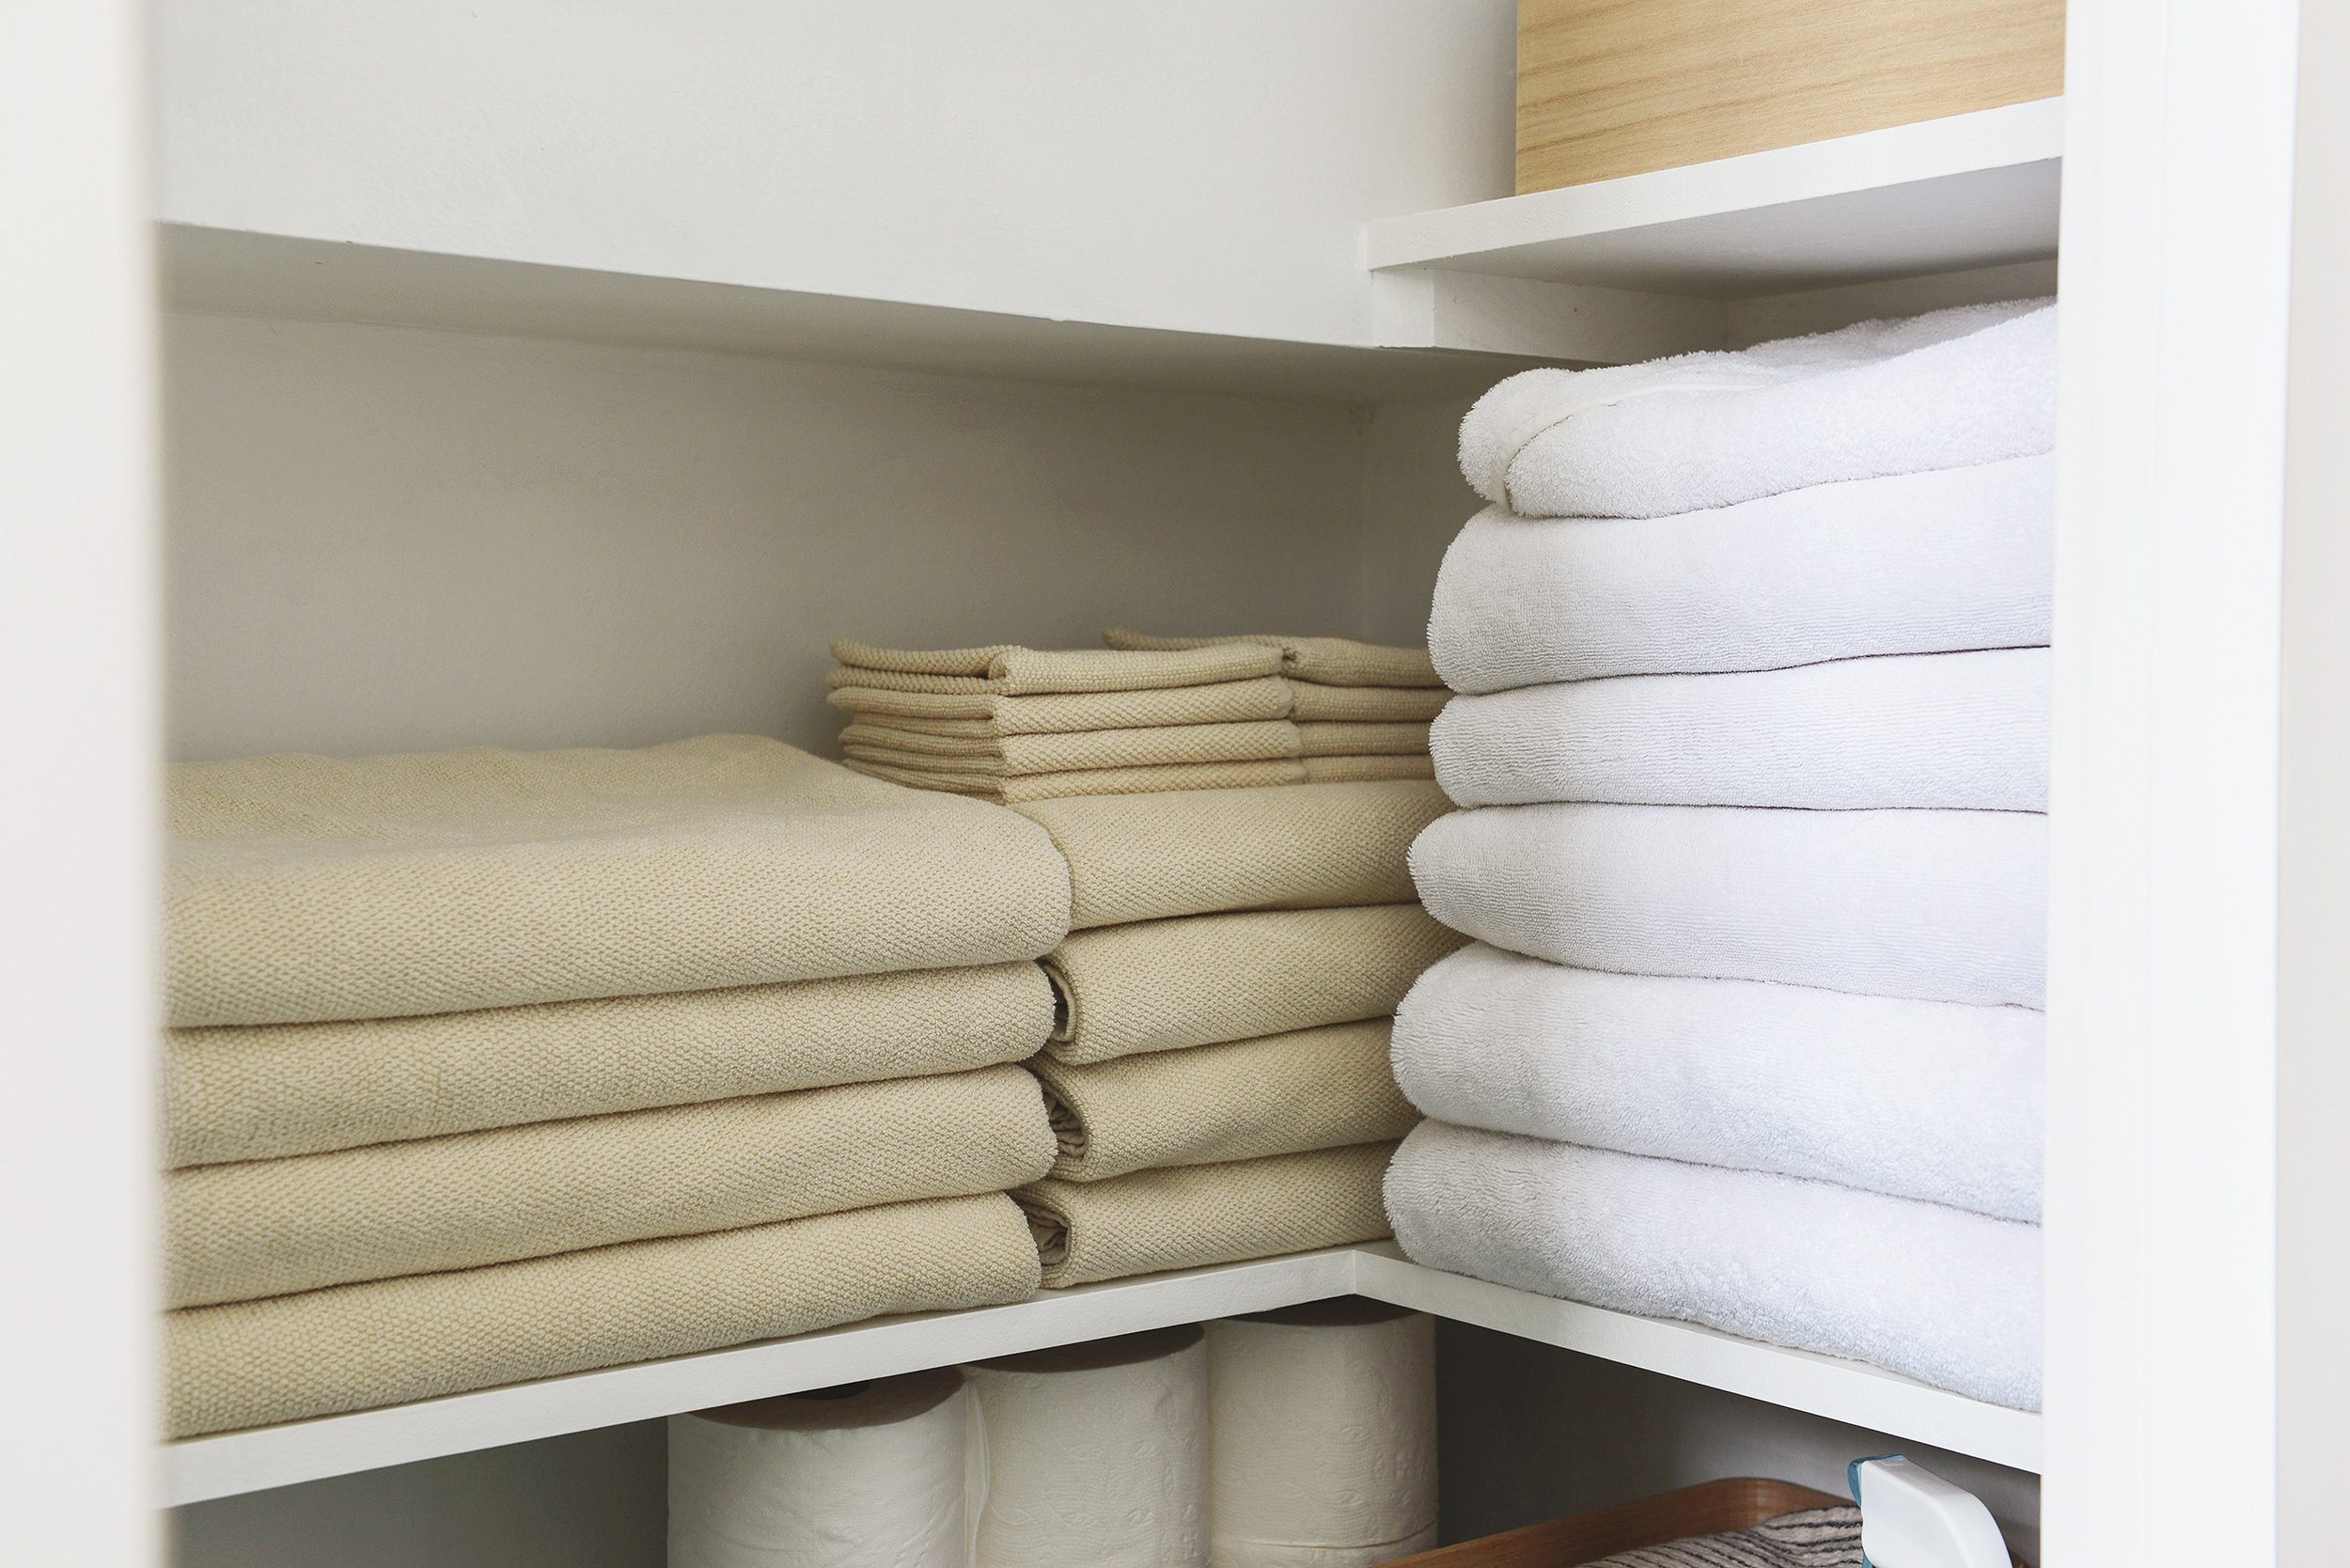 A compact linen closet is stocked with towels and bathroom supplies // via Yellow Brick Home